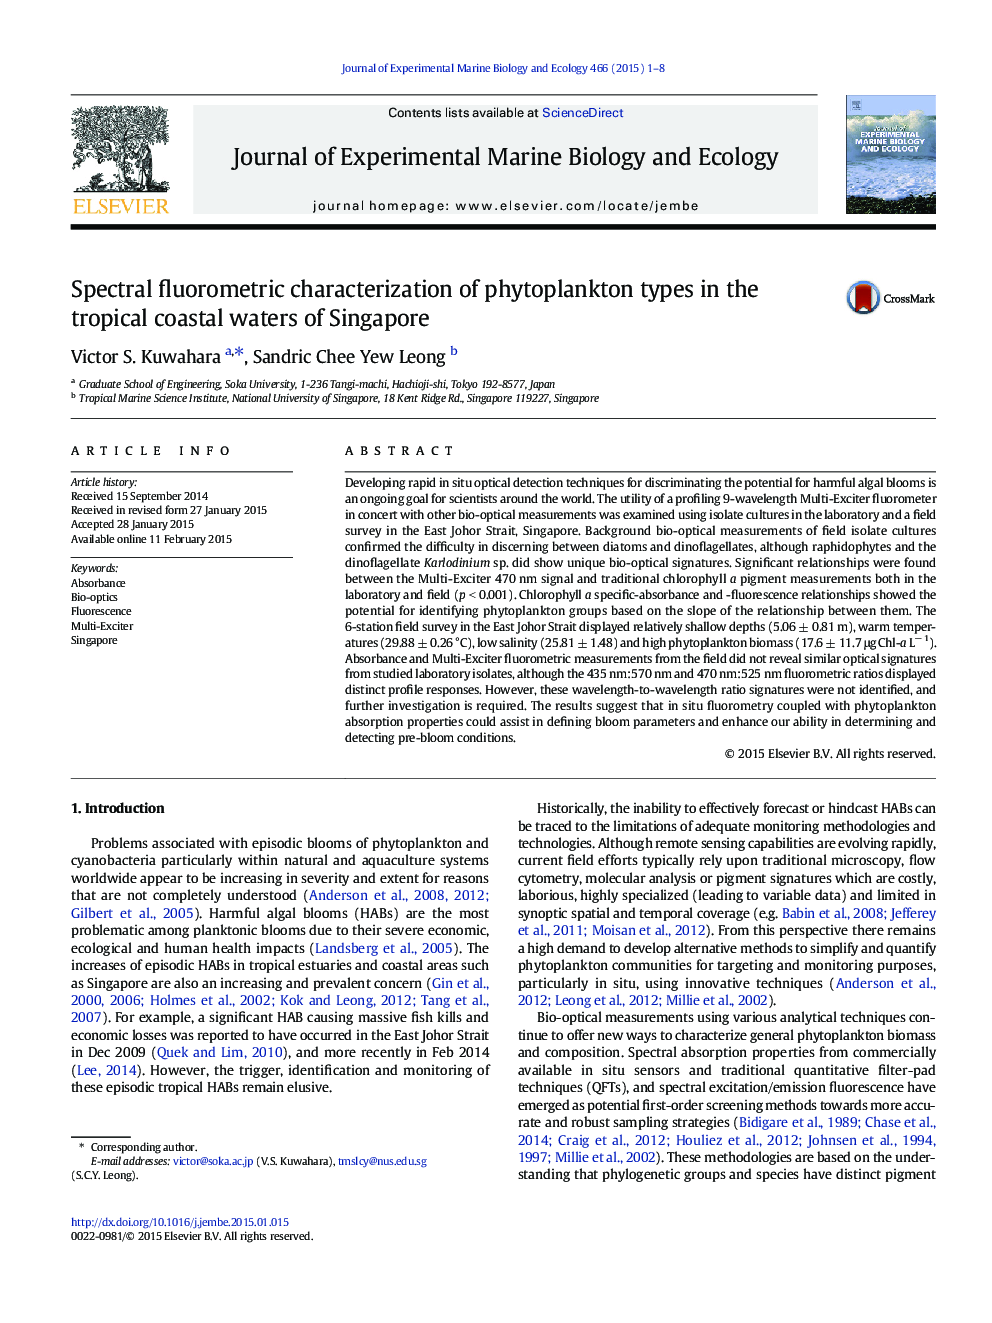 Spectral fluorometric characterization of phytoplankton types in the tropical coastal waters of Singapore